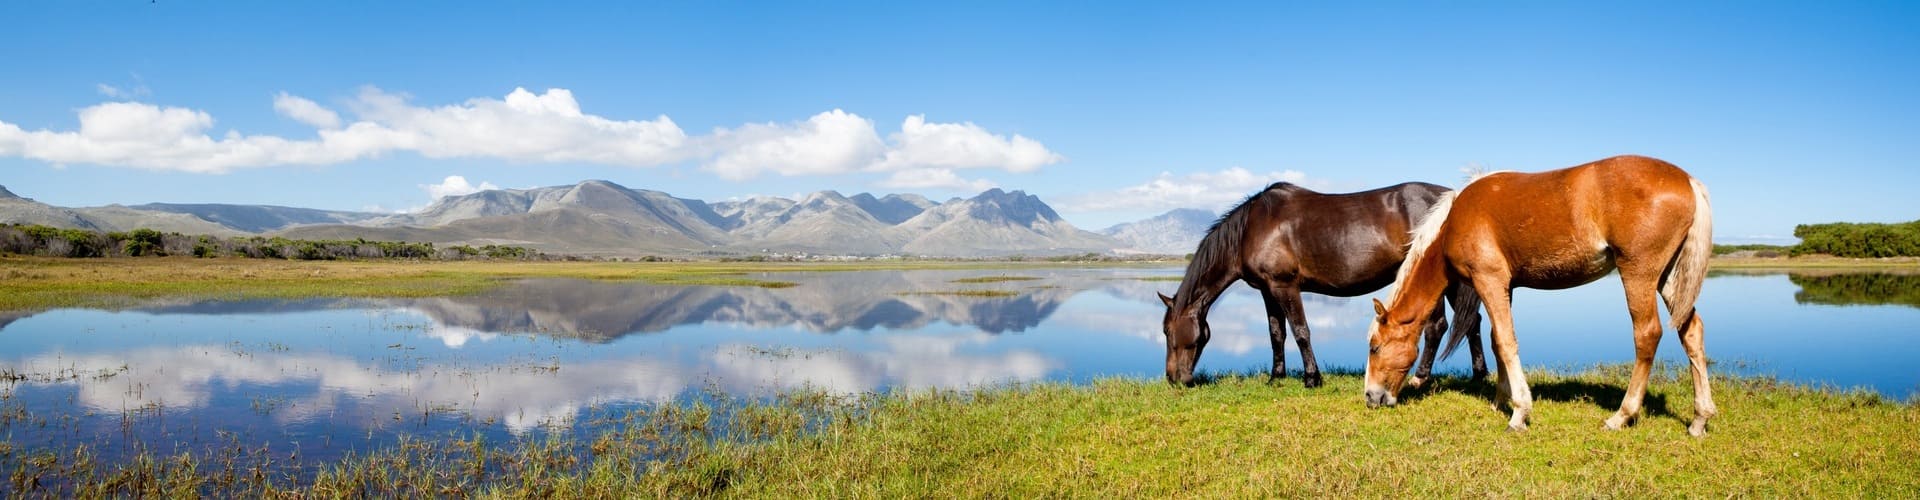 2 horses eating grass beside a lake with mountains in the distance